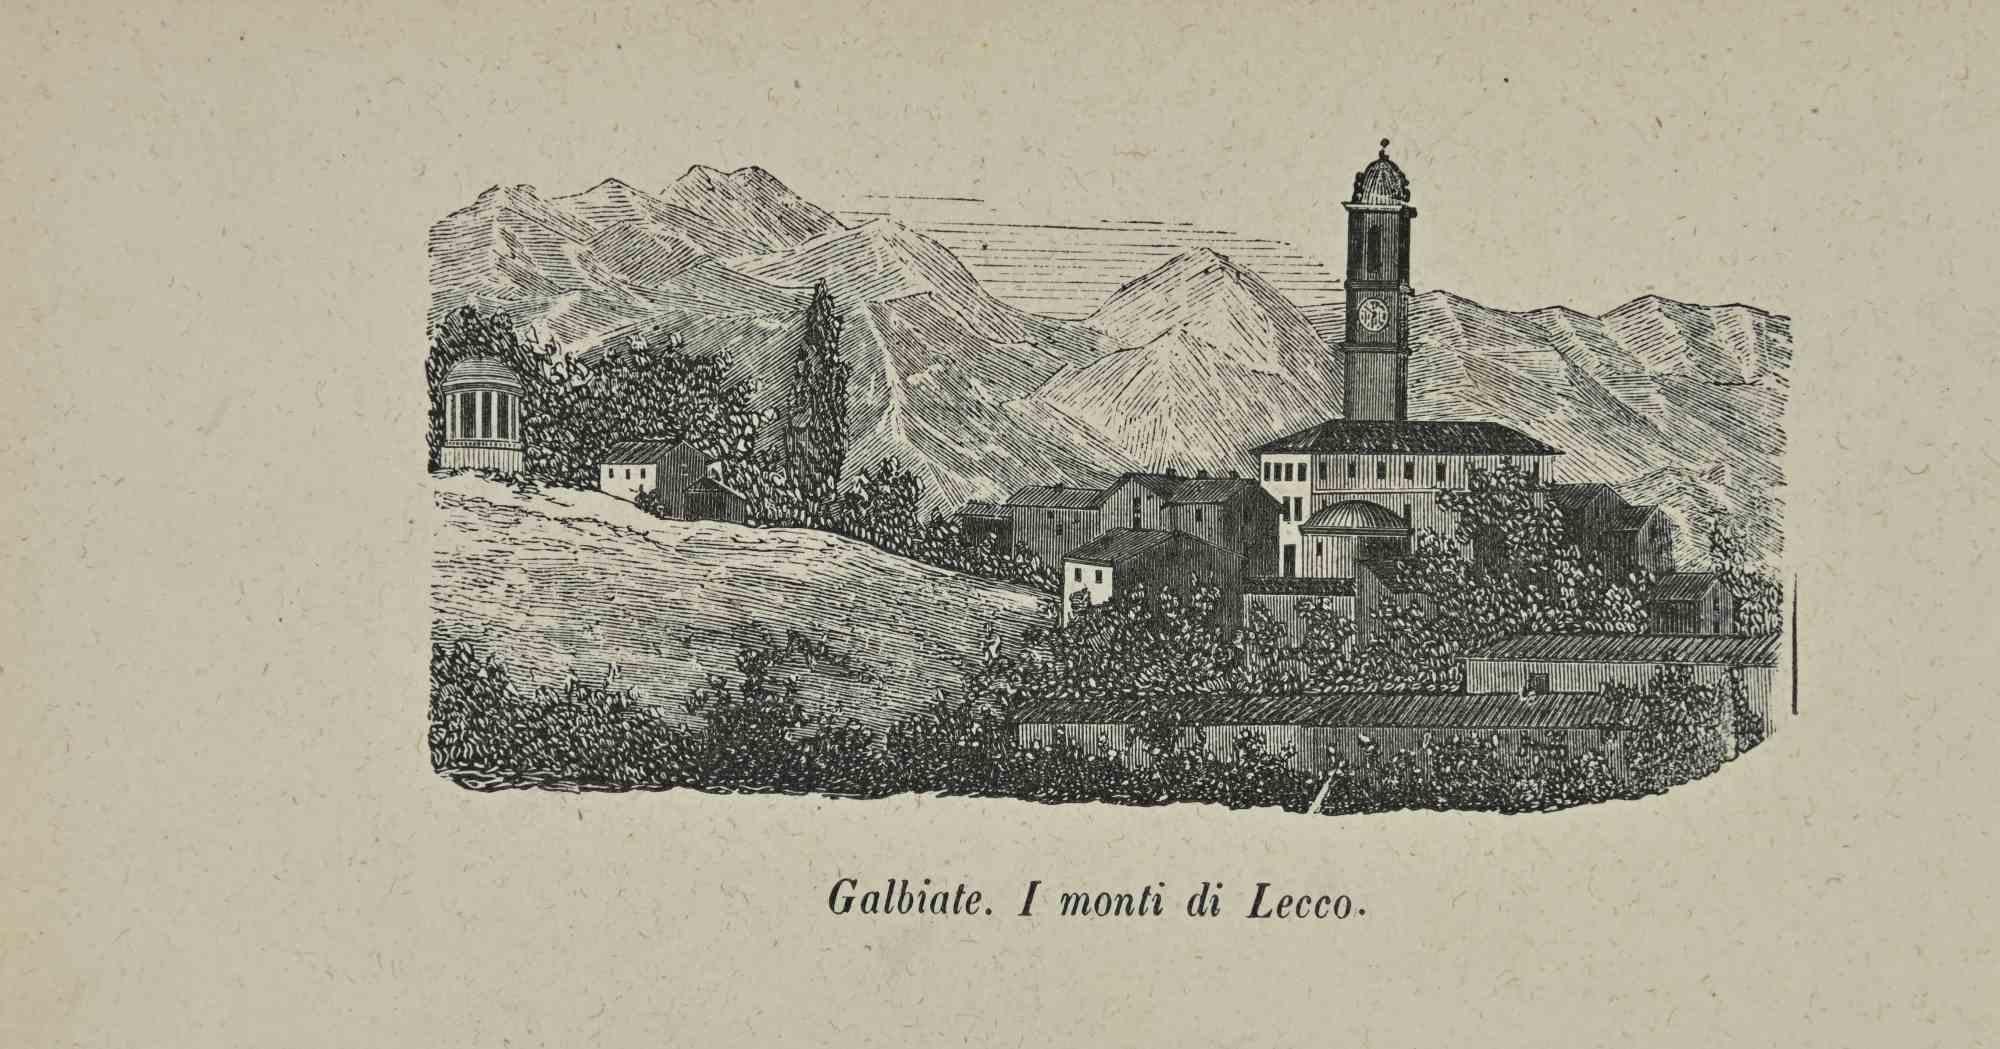 Figurative Print Various Artists - Us et coutumes - Galbiate. The Mountains of Lecco - Lithographie - 1862